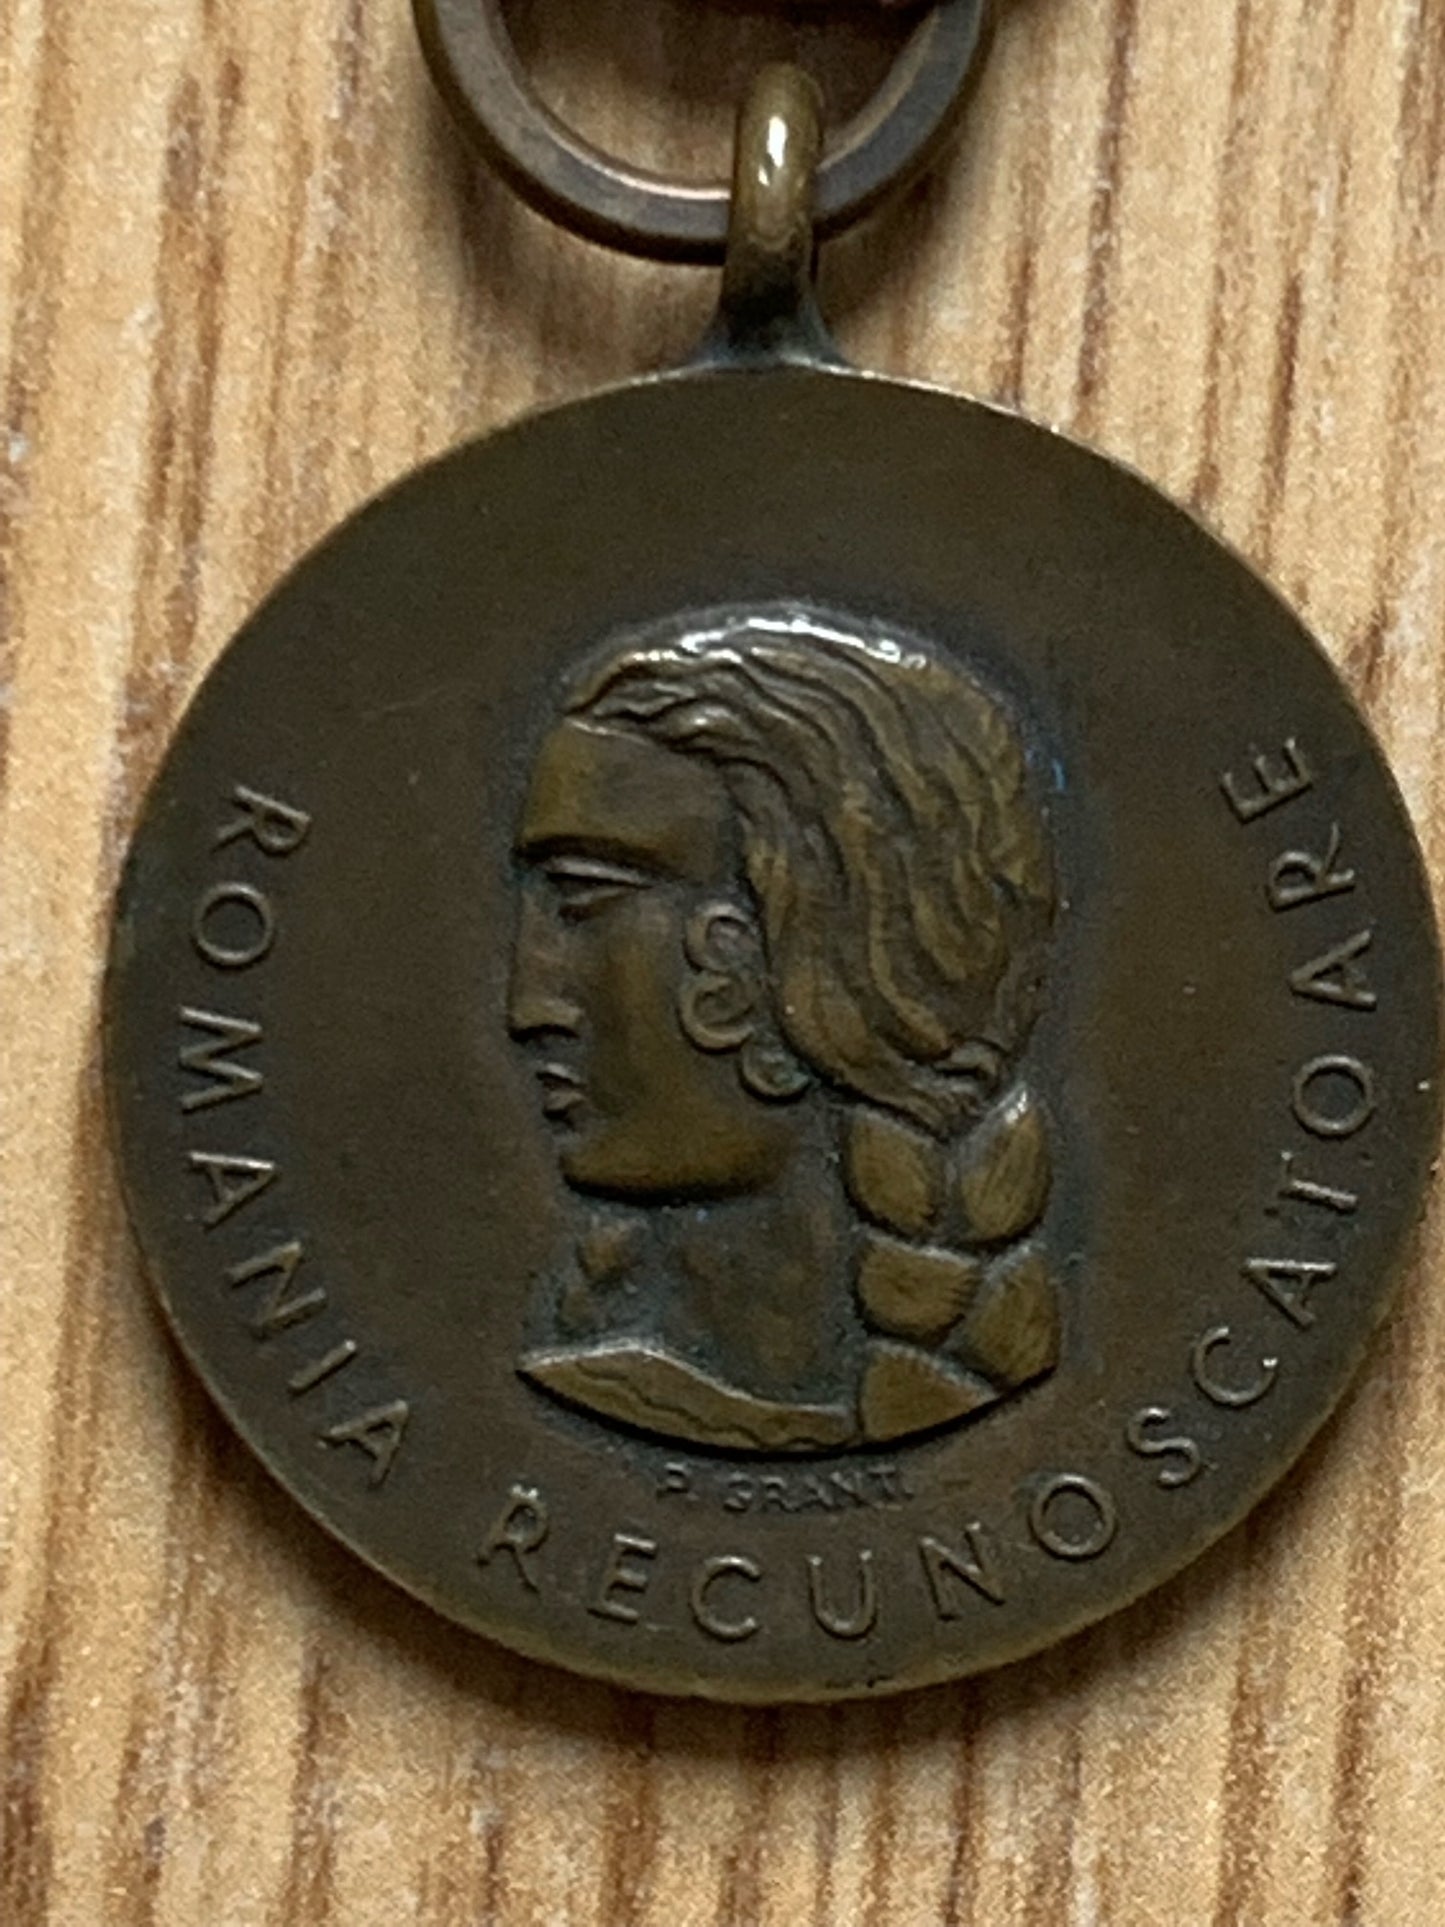 Romanian Eastern front campaign medal